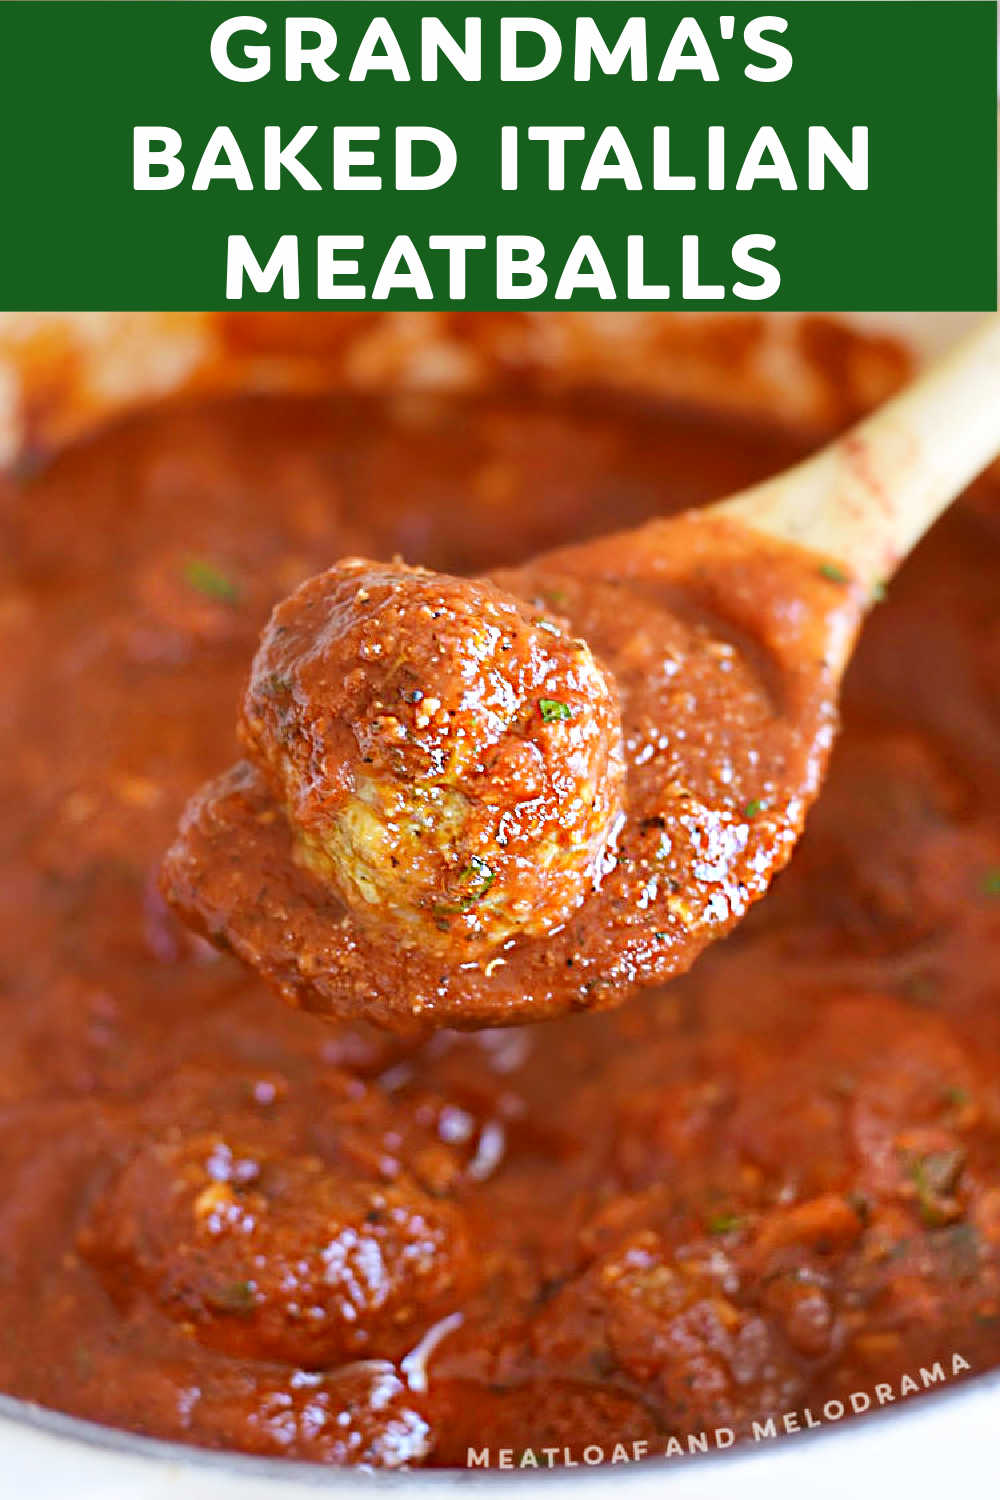 Grandma's Baked Italian Meatball Recipe makes the best homemade meatballs that are oven baked and delicious with marinara sauce over pasta. Your whole family will love this easy meatball recipe for dinner or as a hearty appetizer! via @meamel